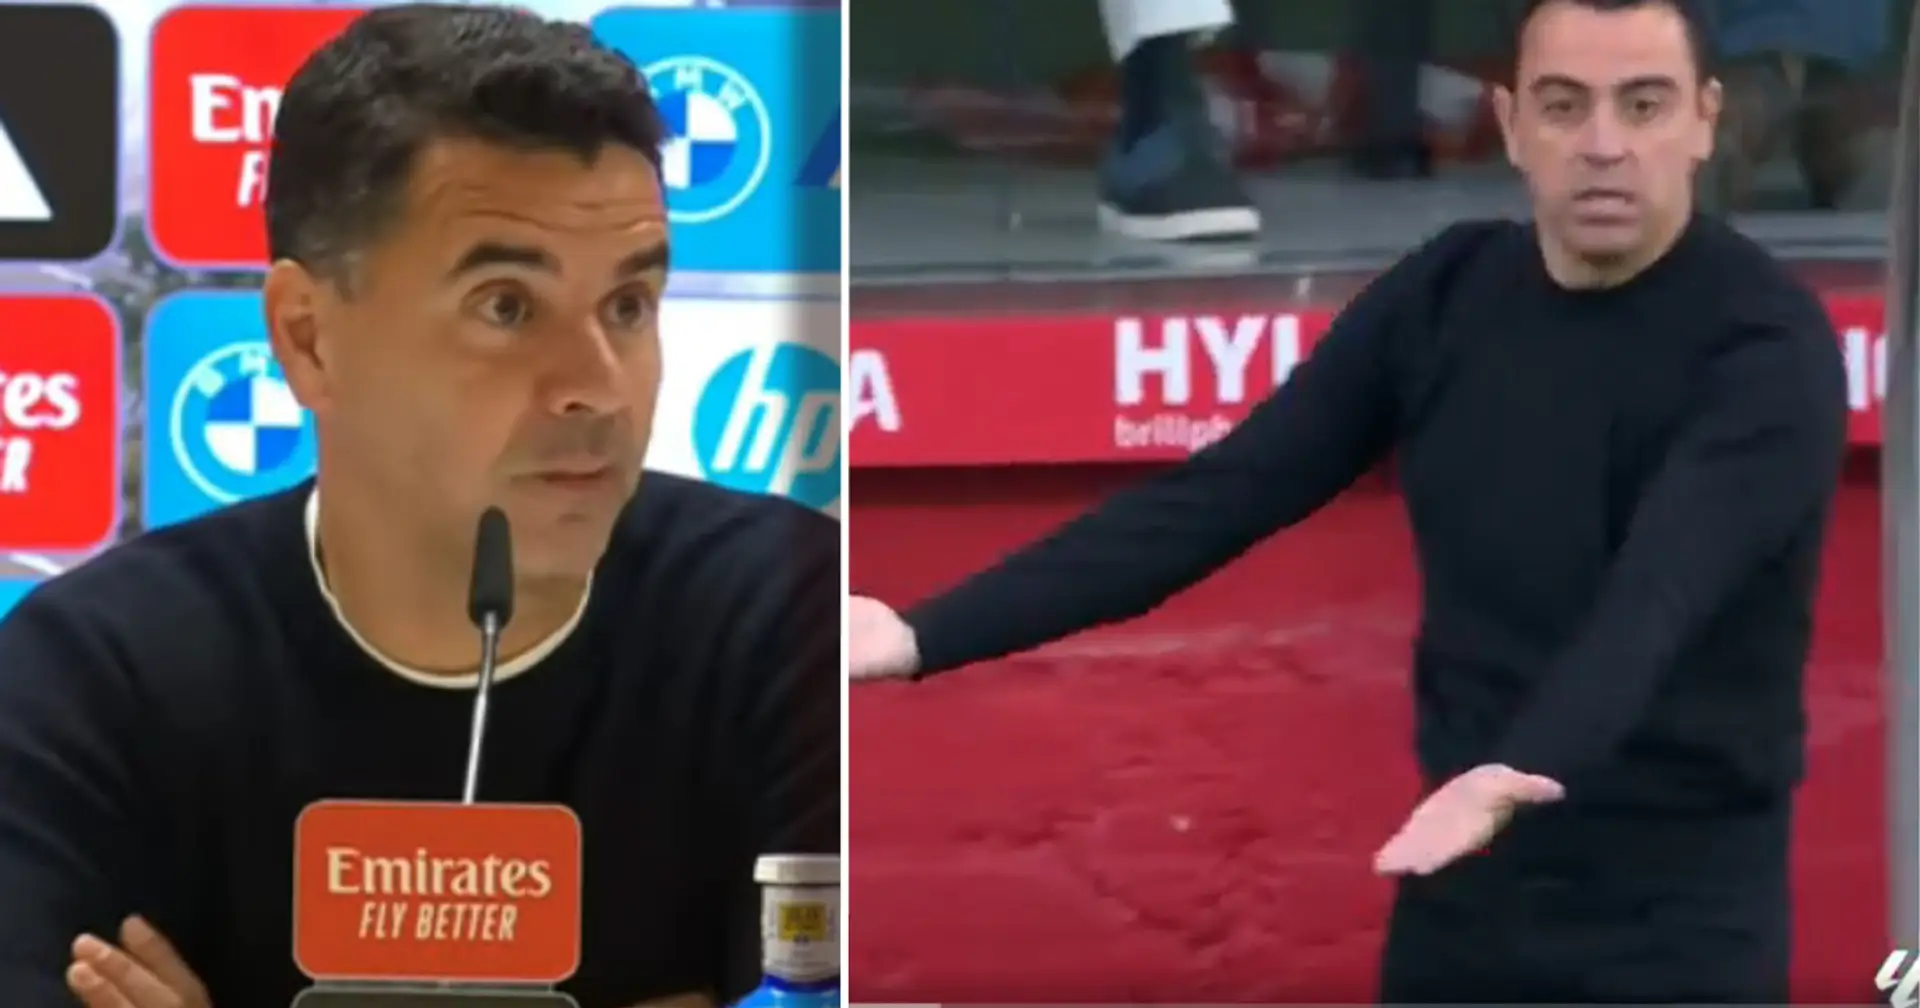 'You're always gonna end up losing': Girona coach reveals what he told Xavi after beating him